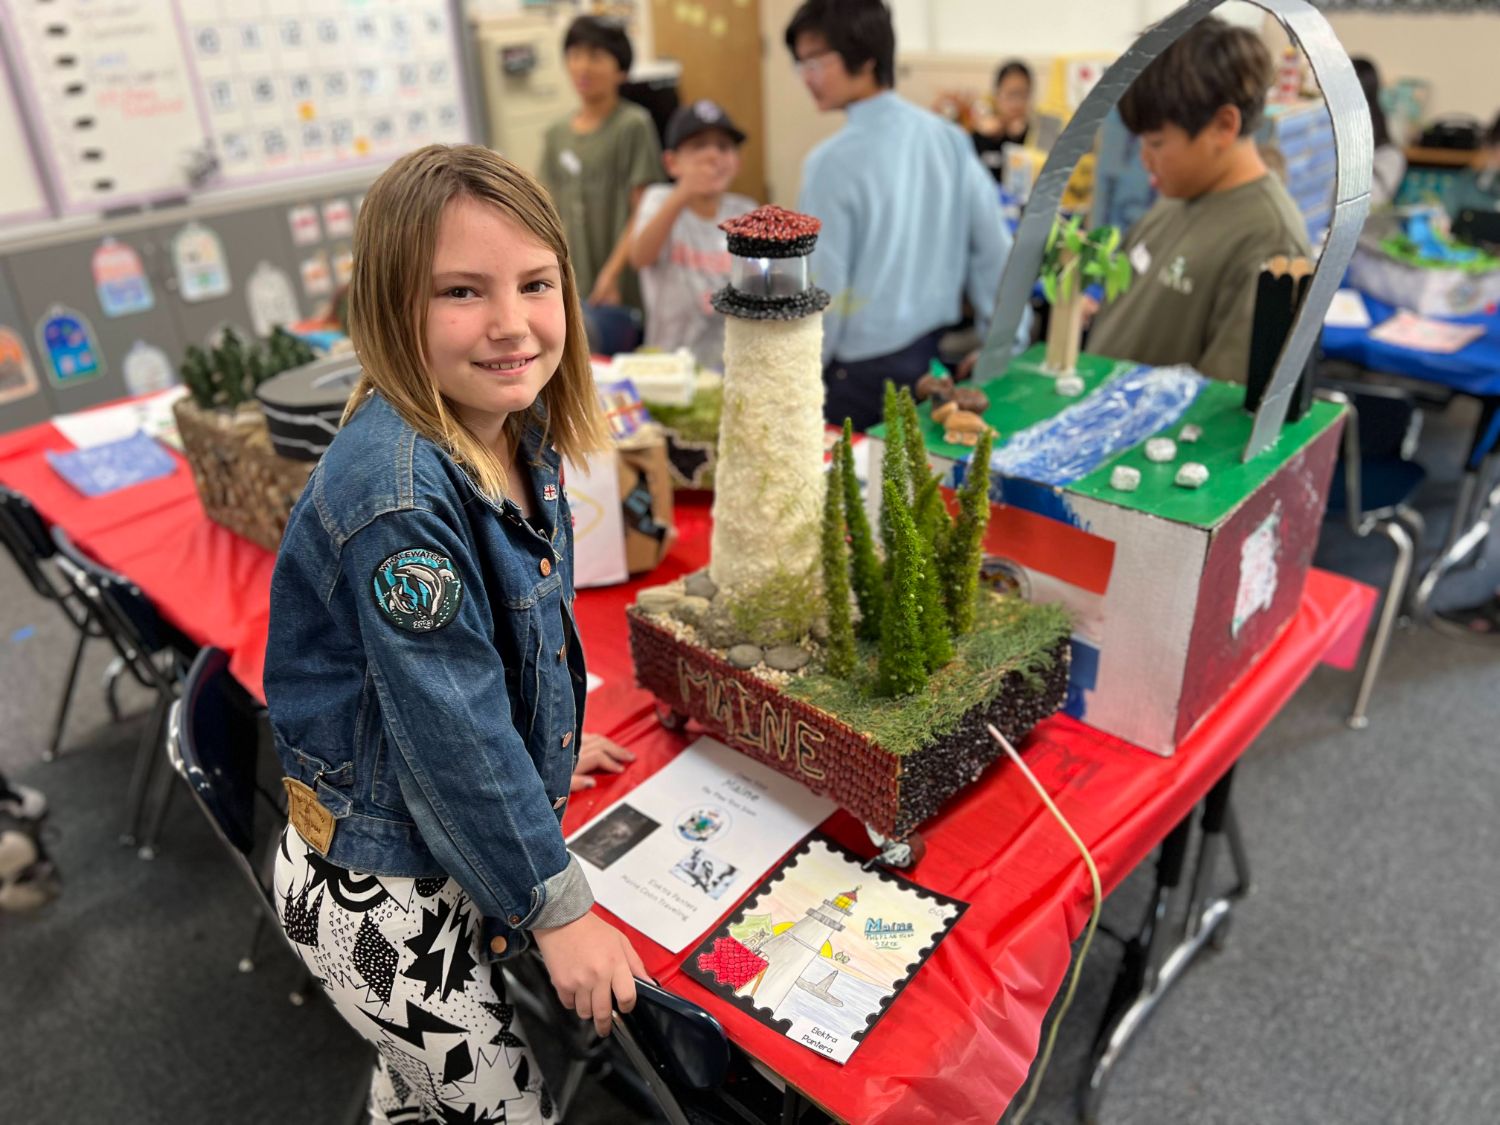 PHOTO: provided by South Pasadena Unified School District | The South Pasadenan | Arroyo Vista fifth graders enthusiastically share their state projects.